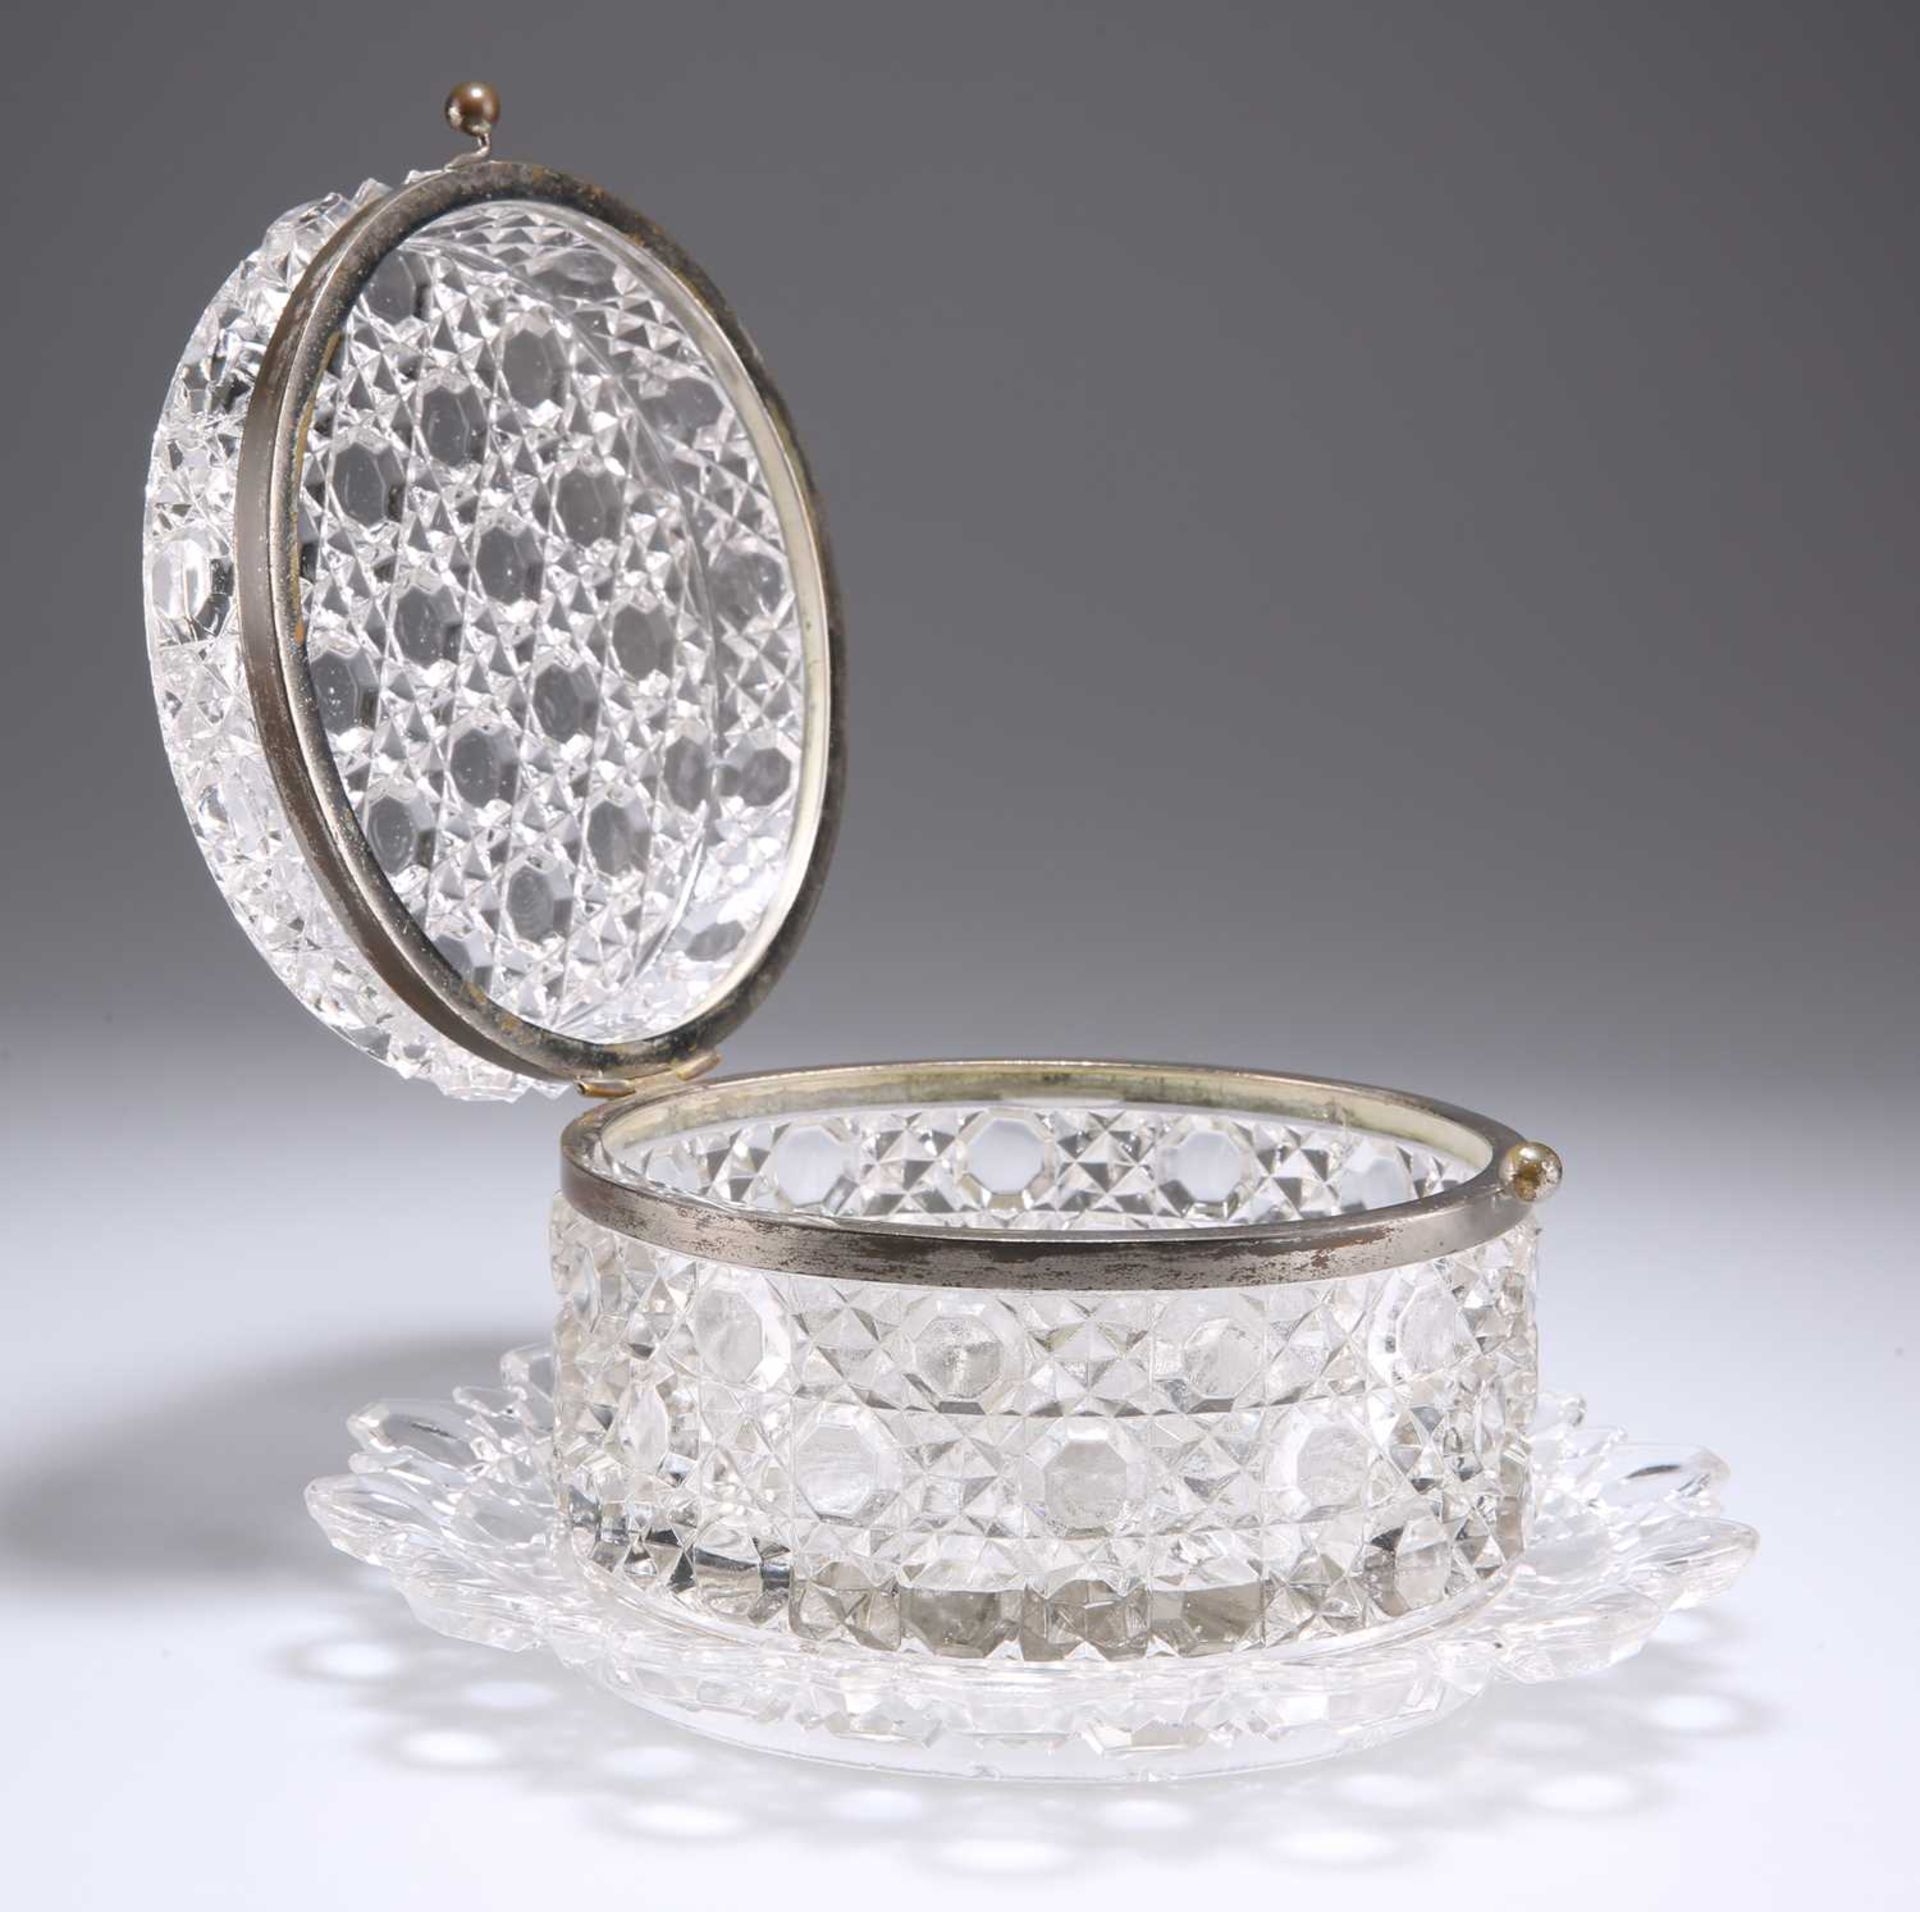 A BACCARAT GLASS CASKET ON STAND, CIRCA 1880 - Image 2 of 2